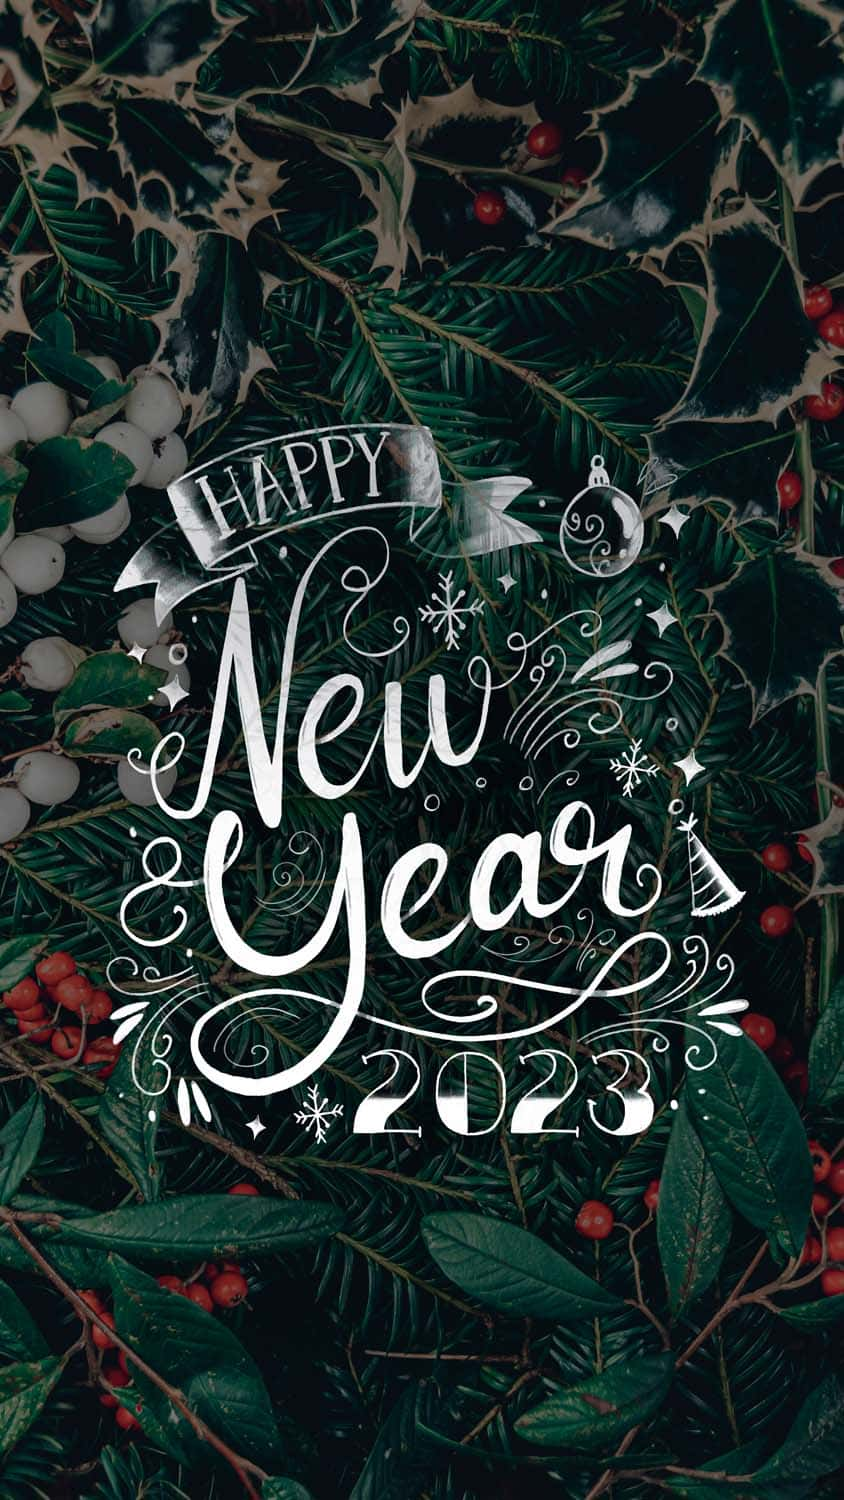 Happy New Year 2023 IPhone Wallpaper HD  IPhone Wallpapers